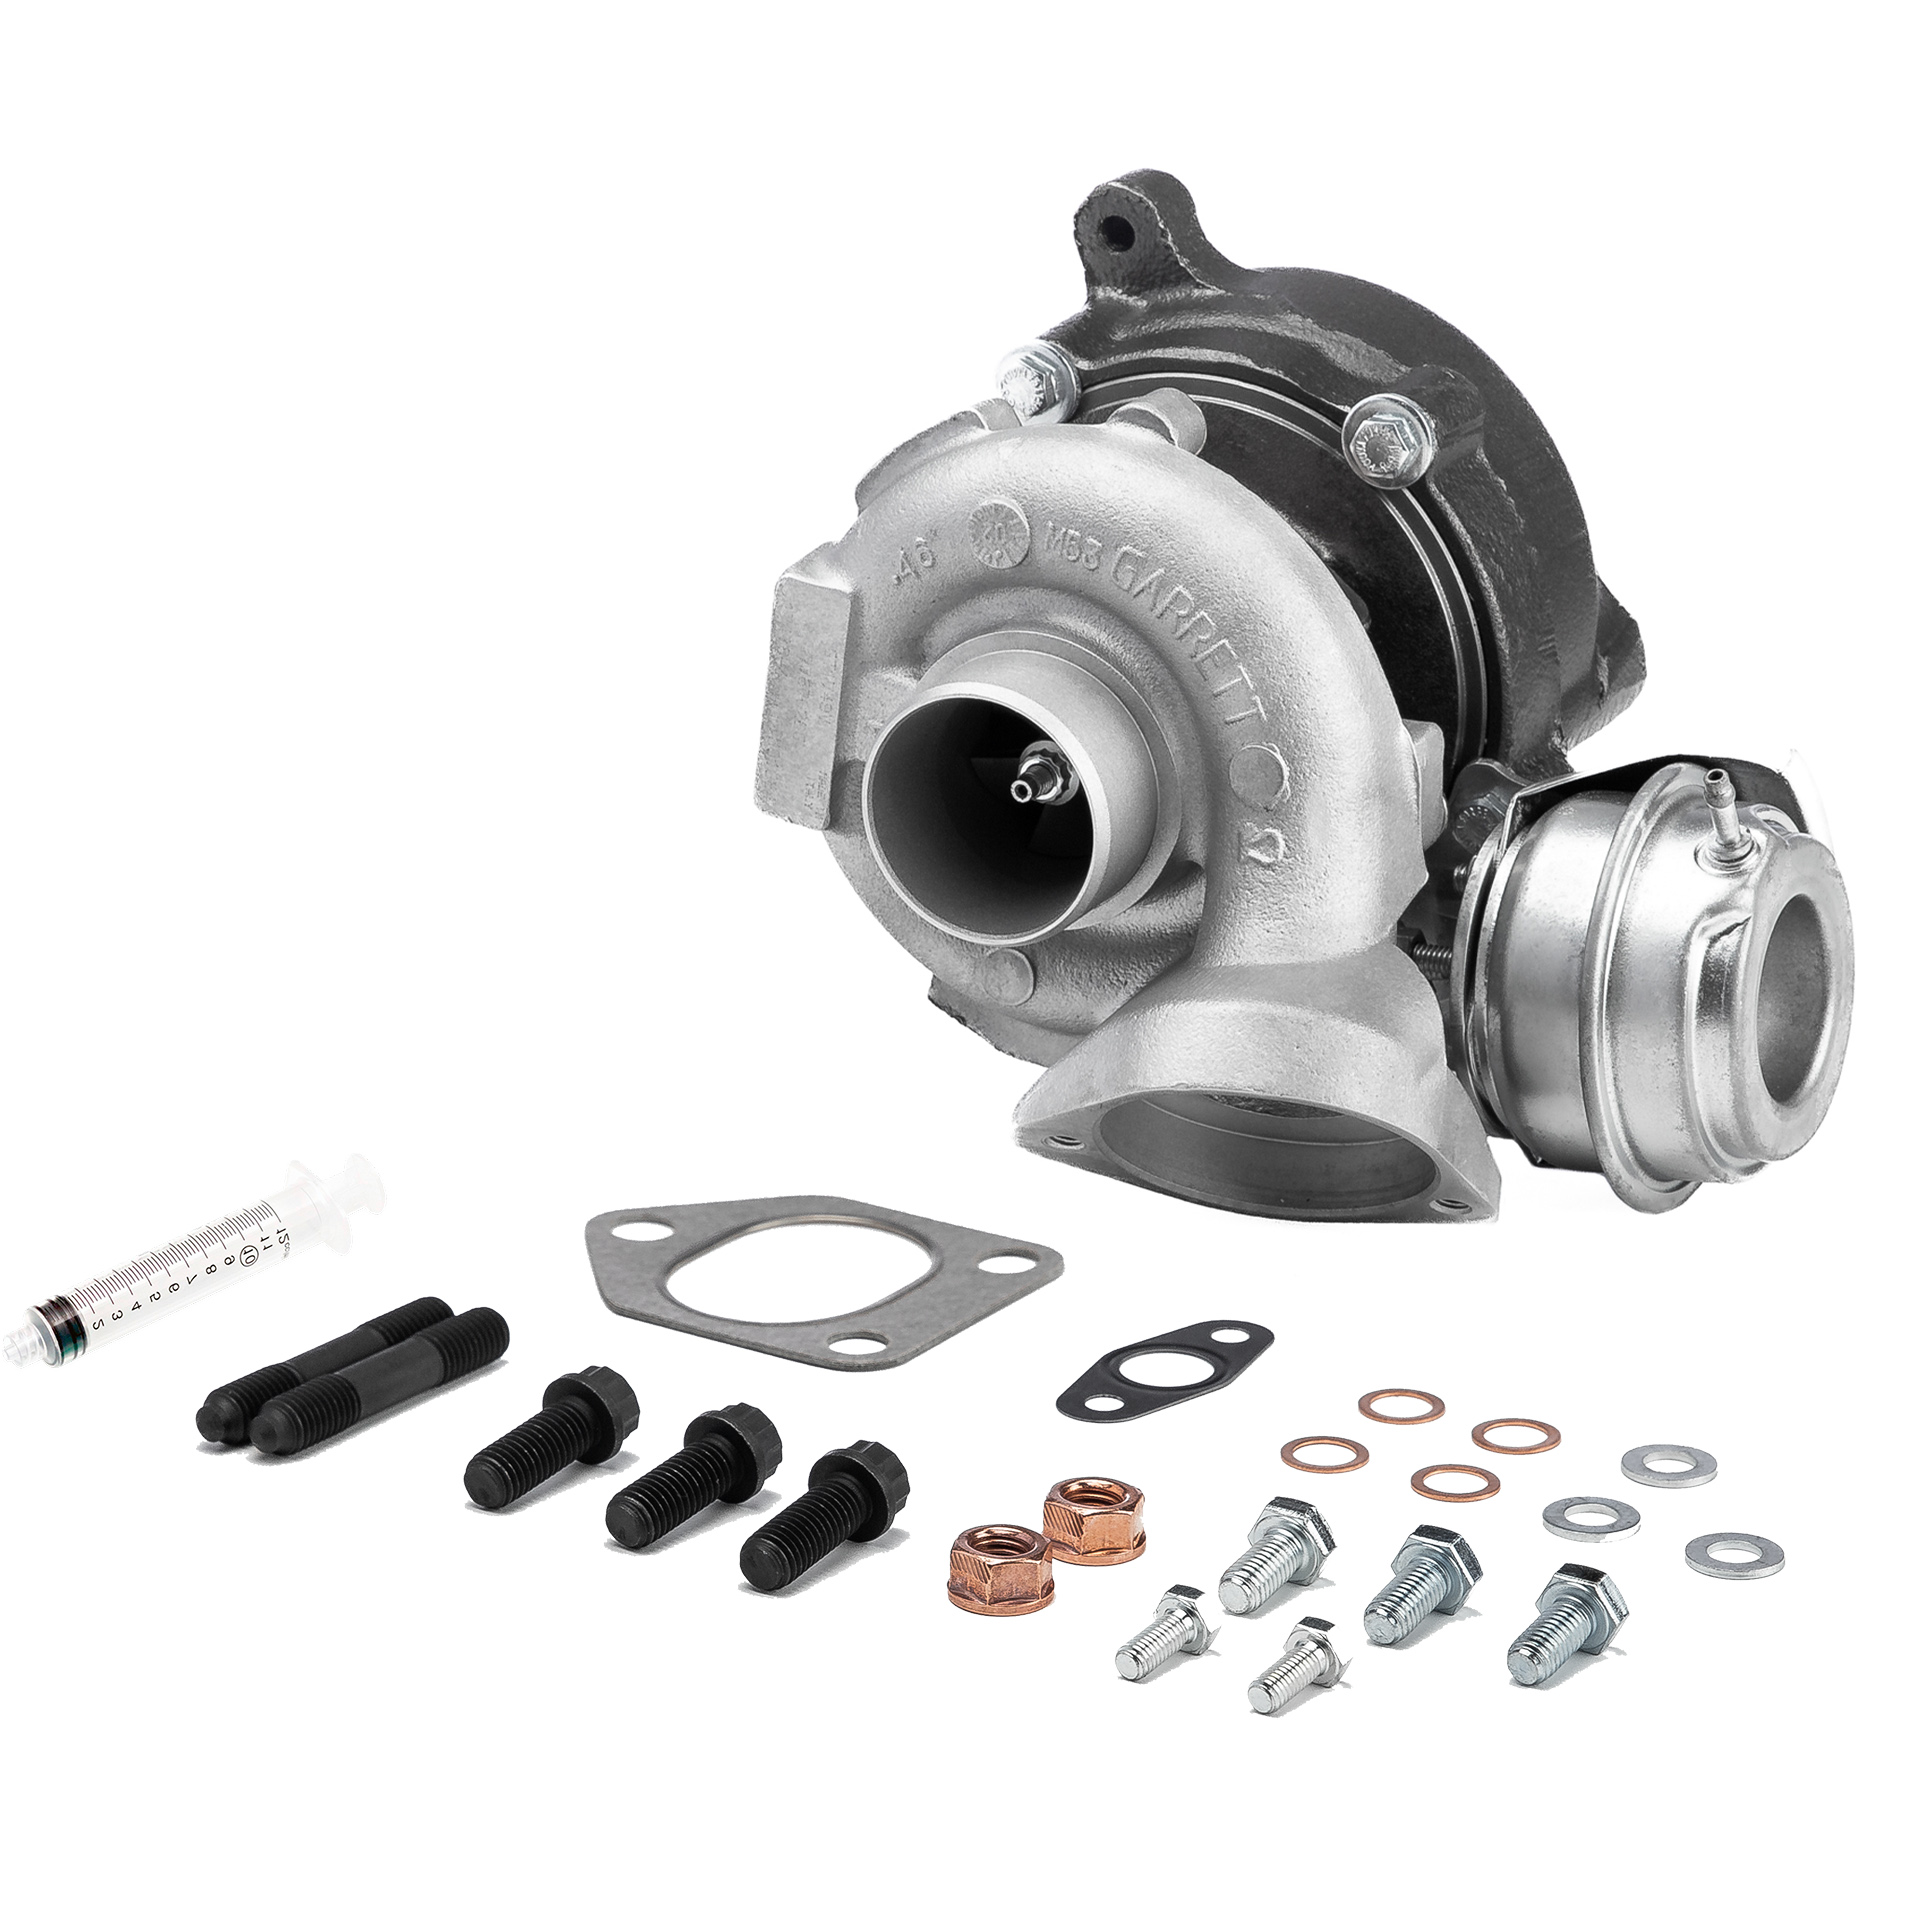 BR Turbo Turbo, with attachment material Turbo 750431-5001RSM buy